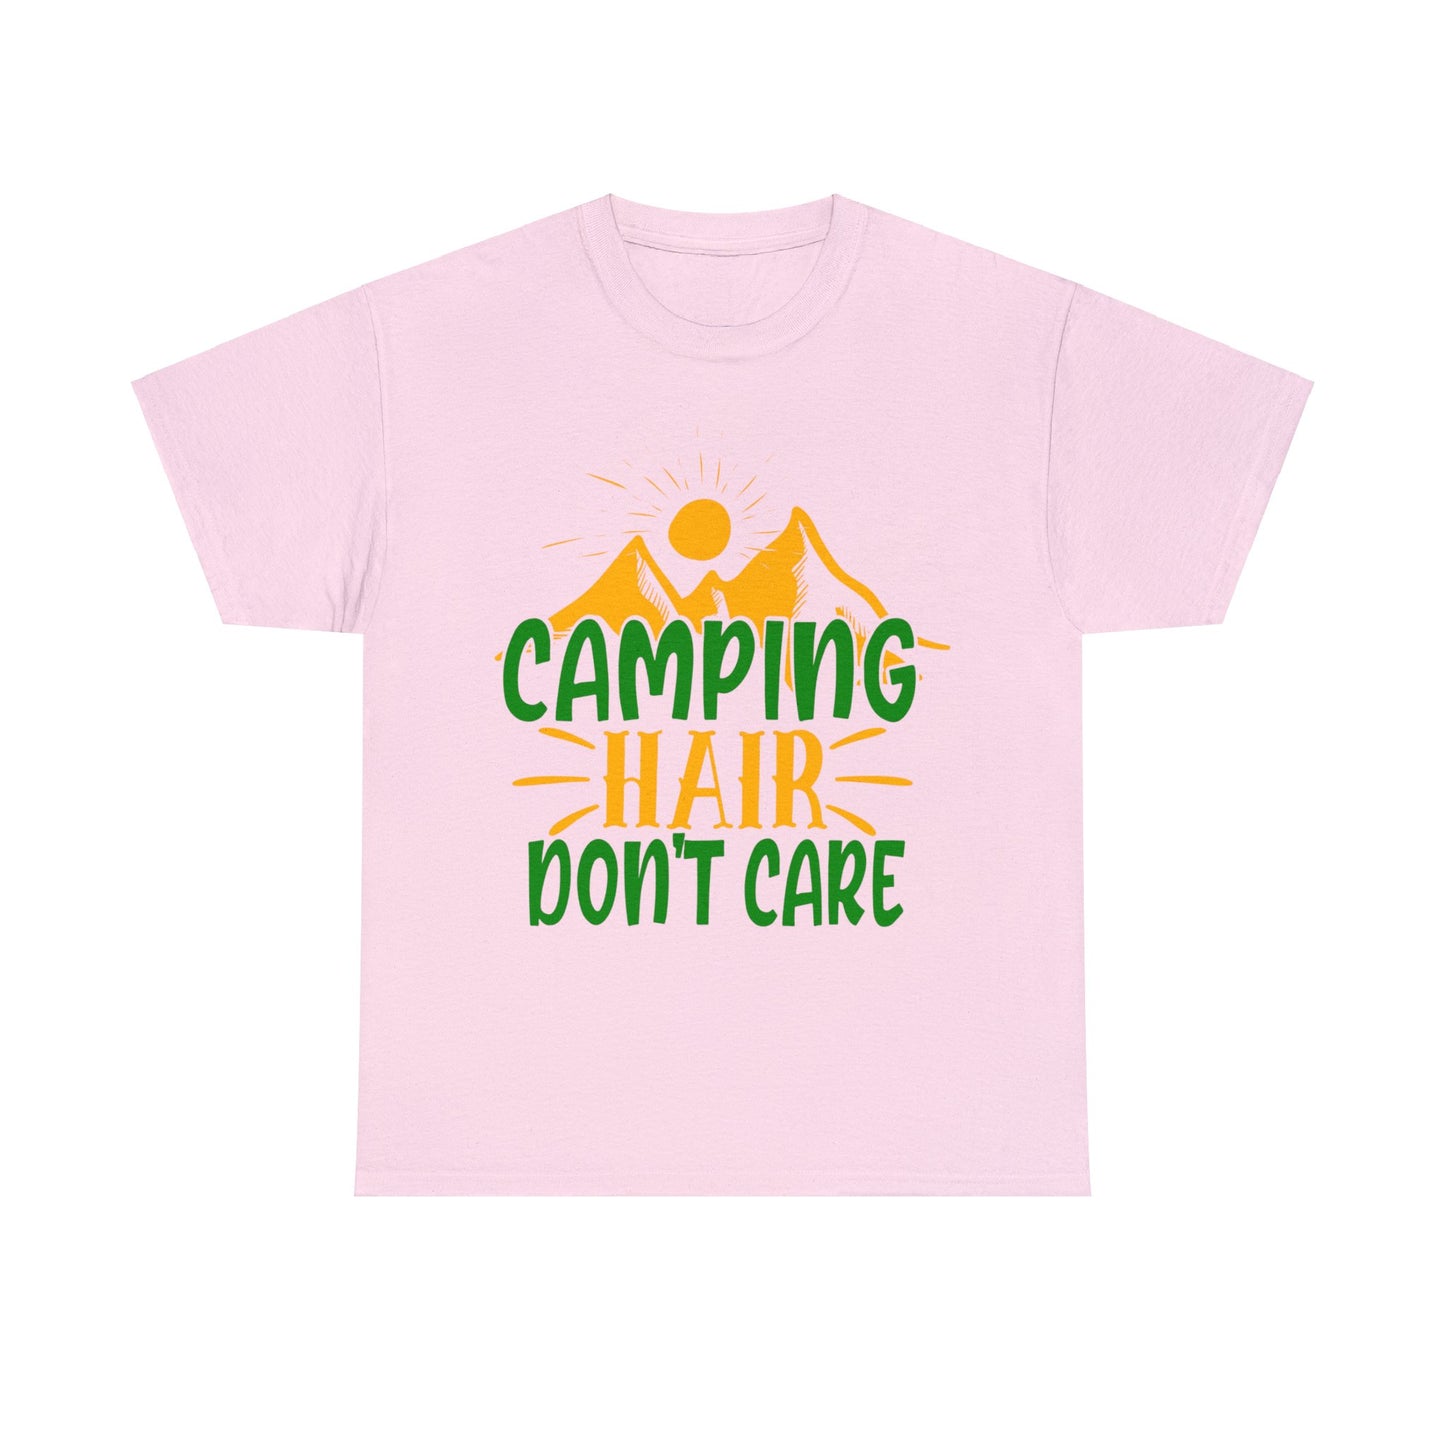 Camping Hair Don't Care T-Shirt: Outdoors in Style with this Fun Camping Tee!